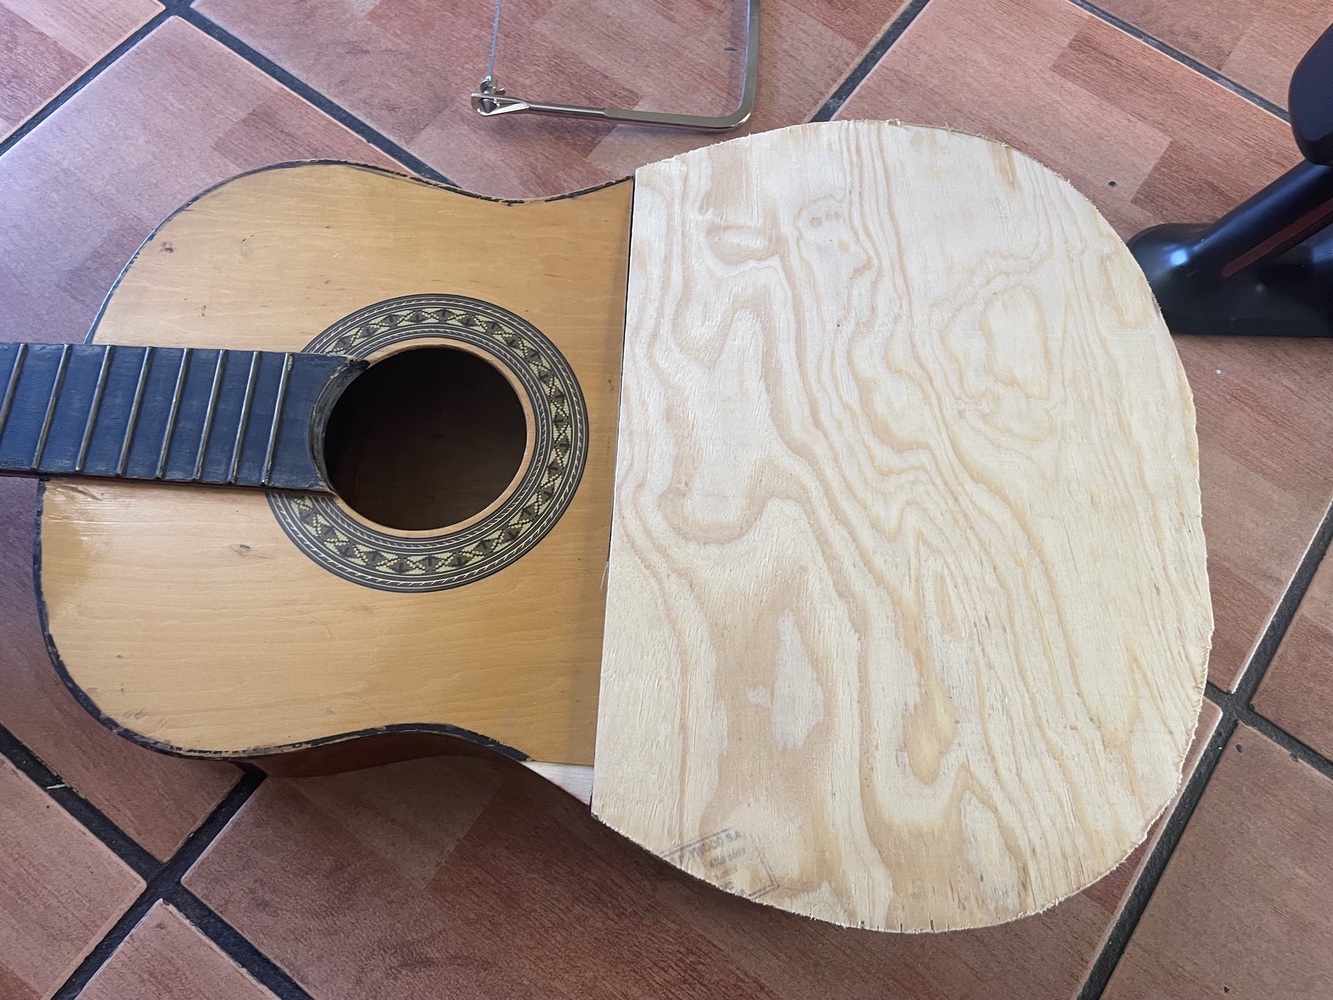 The guitar with it's new plywood top